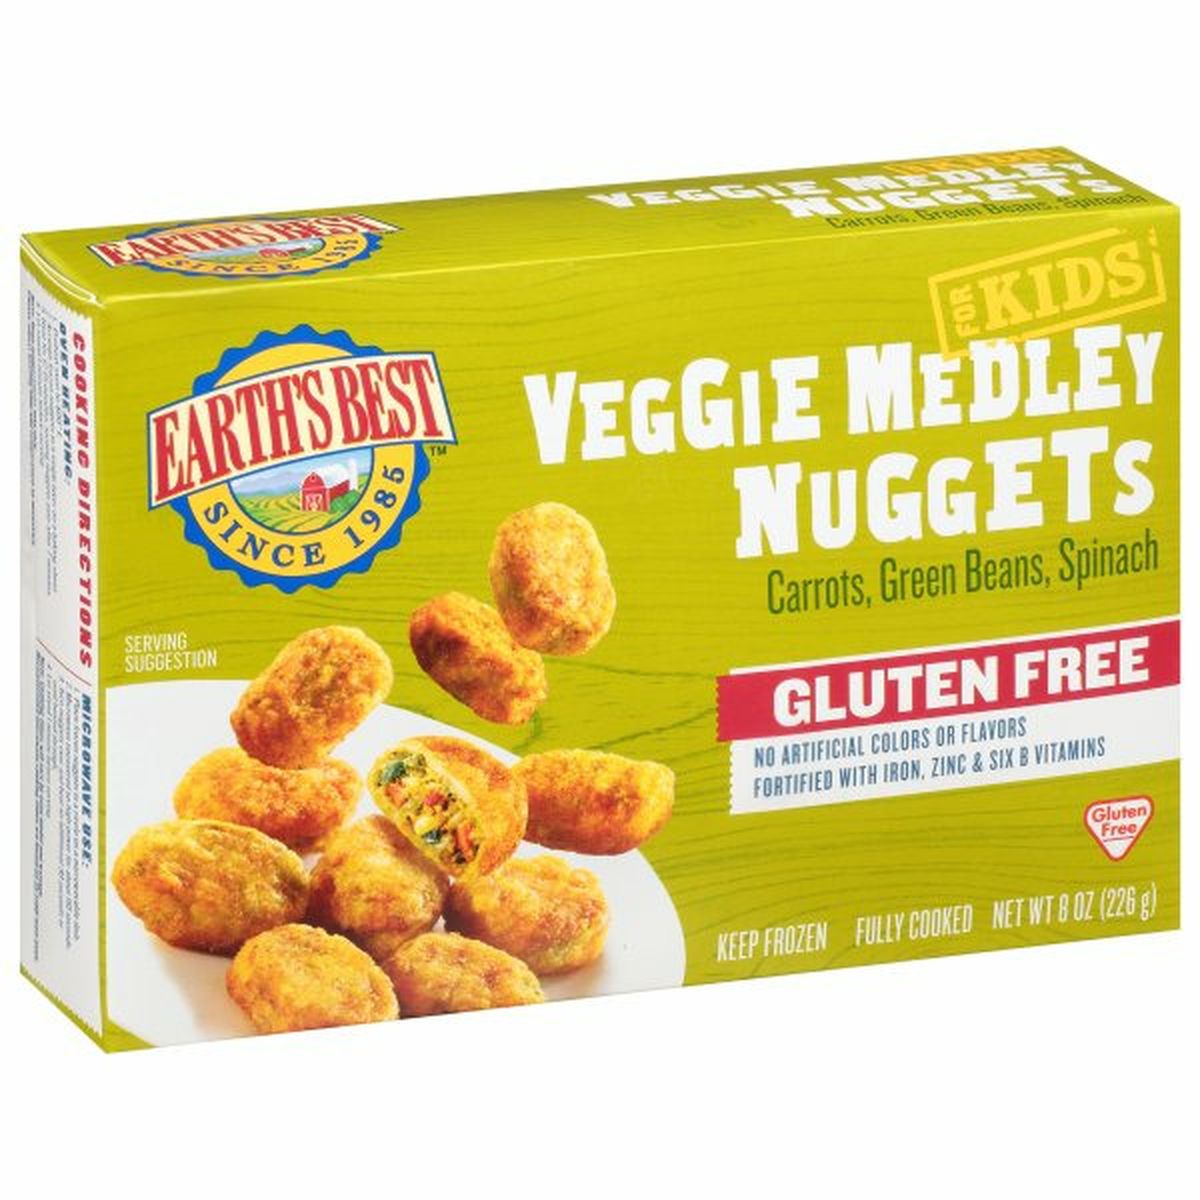 Calories in Earth's Best Nuggets, Gluten Free, Veggie Medley, for Kids